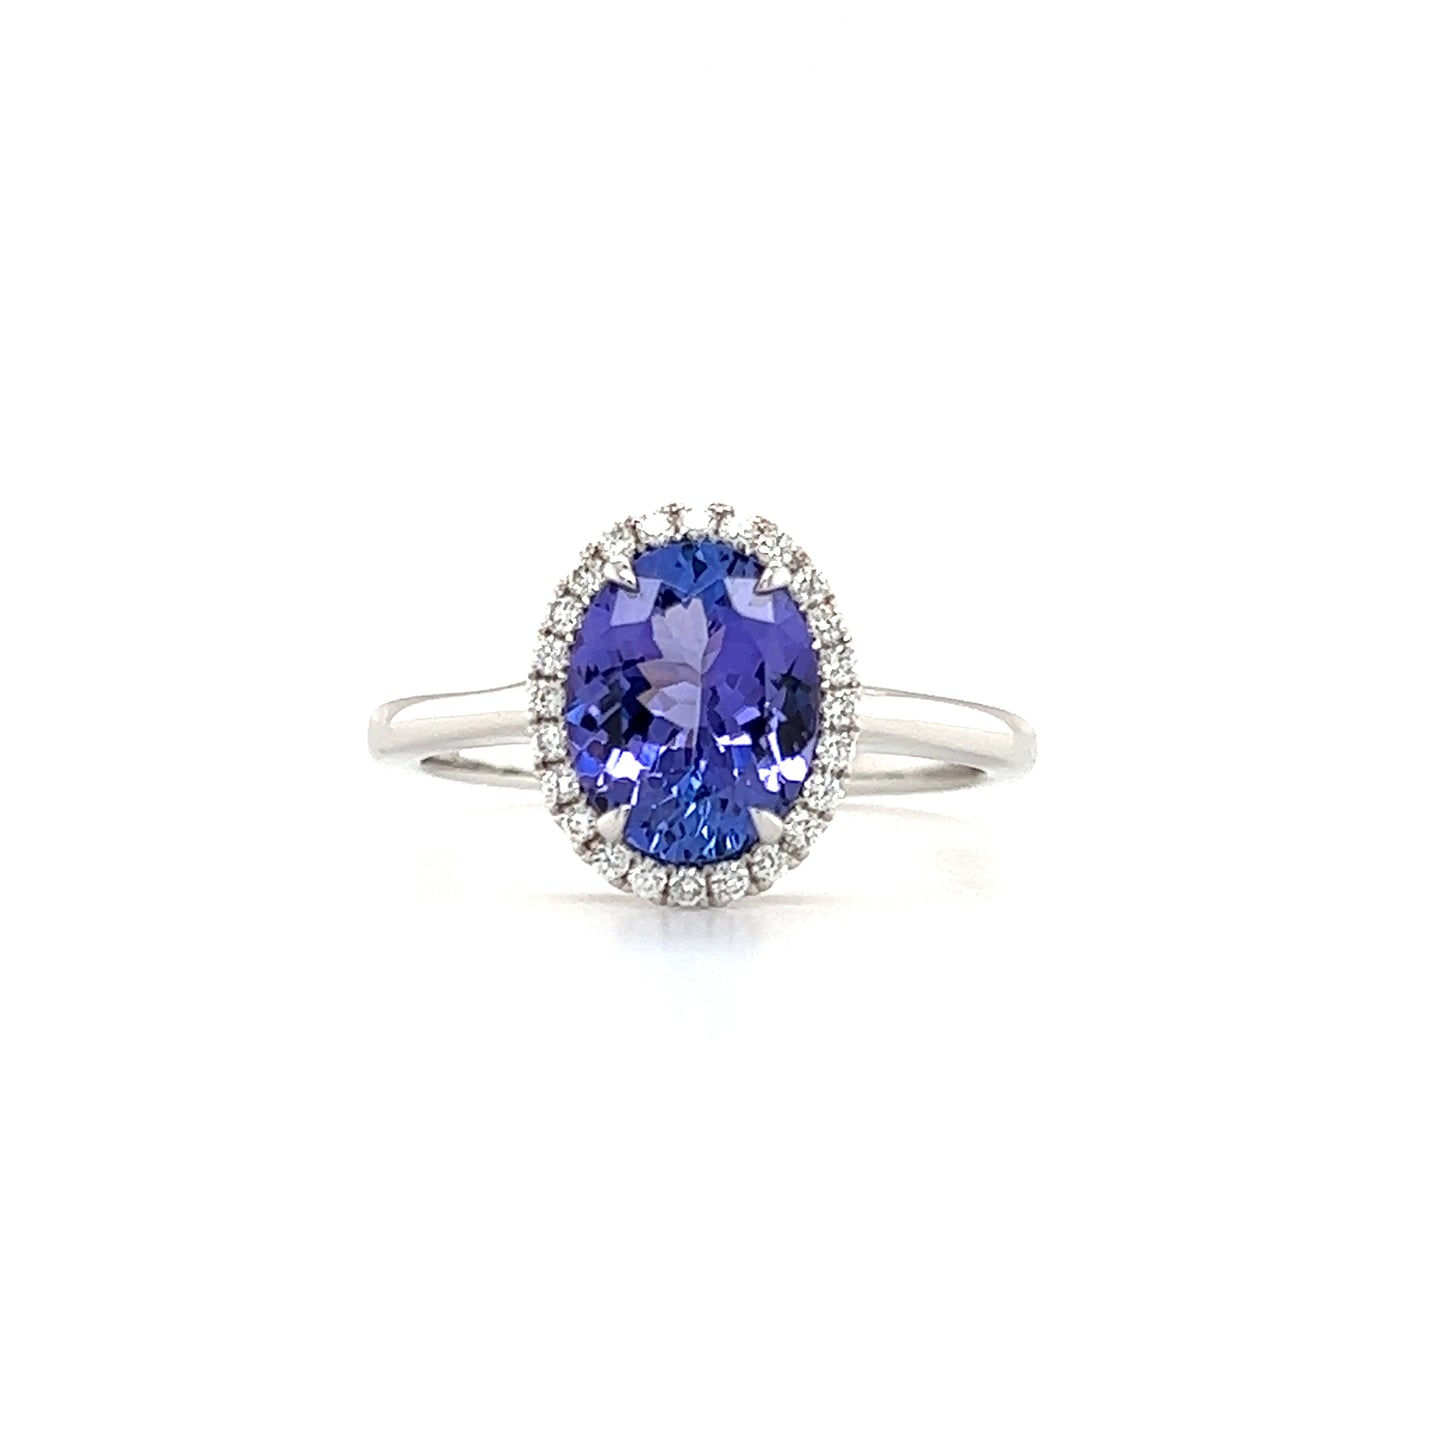 Oval Tanzanite Ring with 1.75ctw of Tanzanite and Diamond Halo in 14K White Gold Front View